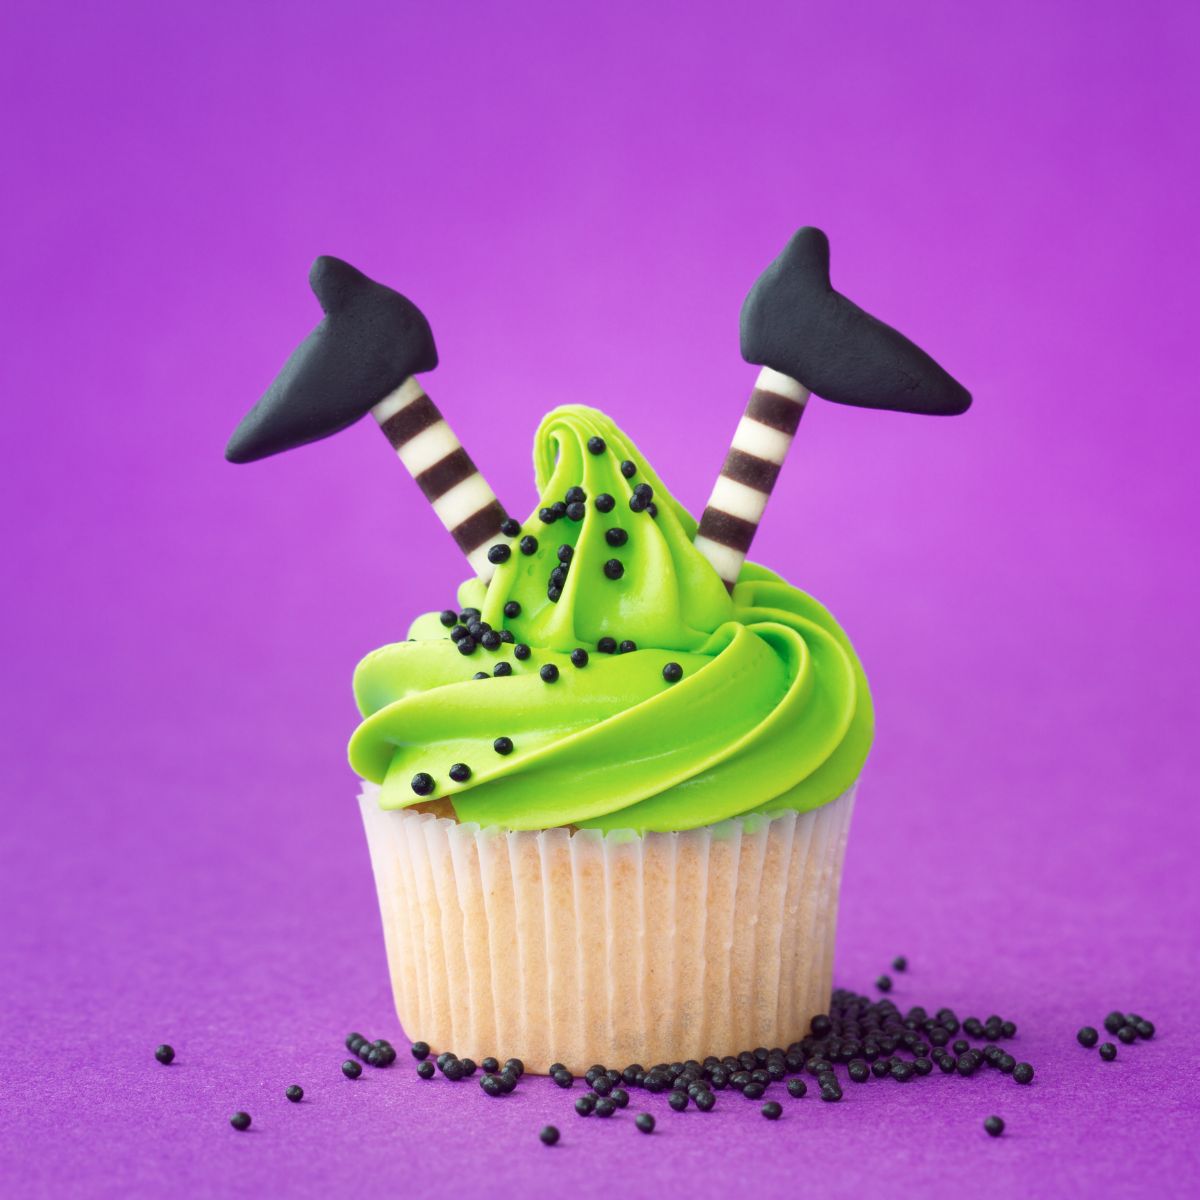 Cupcake with green frosting. Candy that looks like witches legs are sticking out of the top. Purple background.